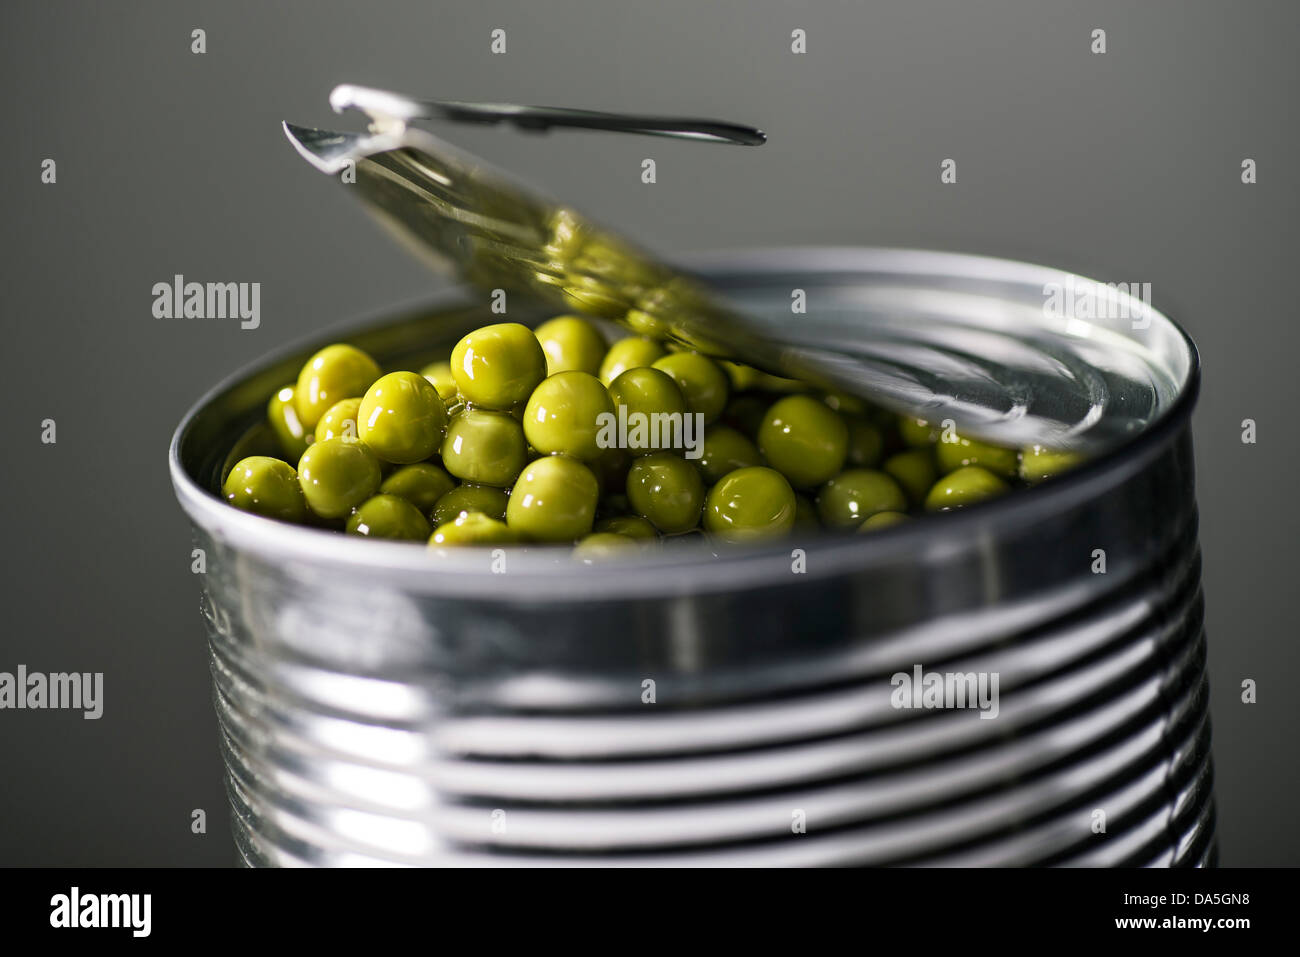 A tin can with the lid open. Peas can be seen. Stock Photo